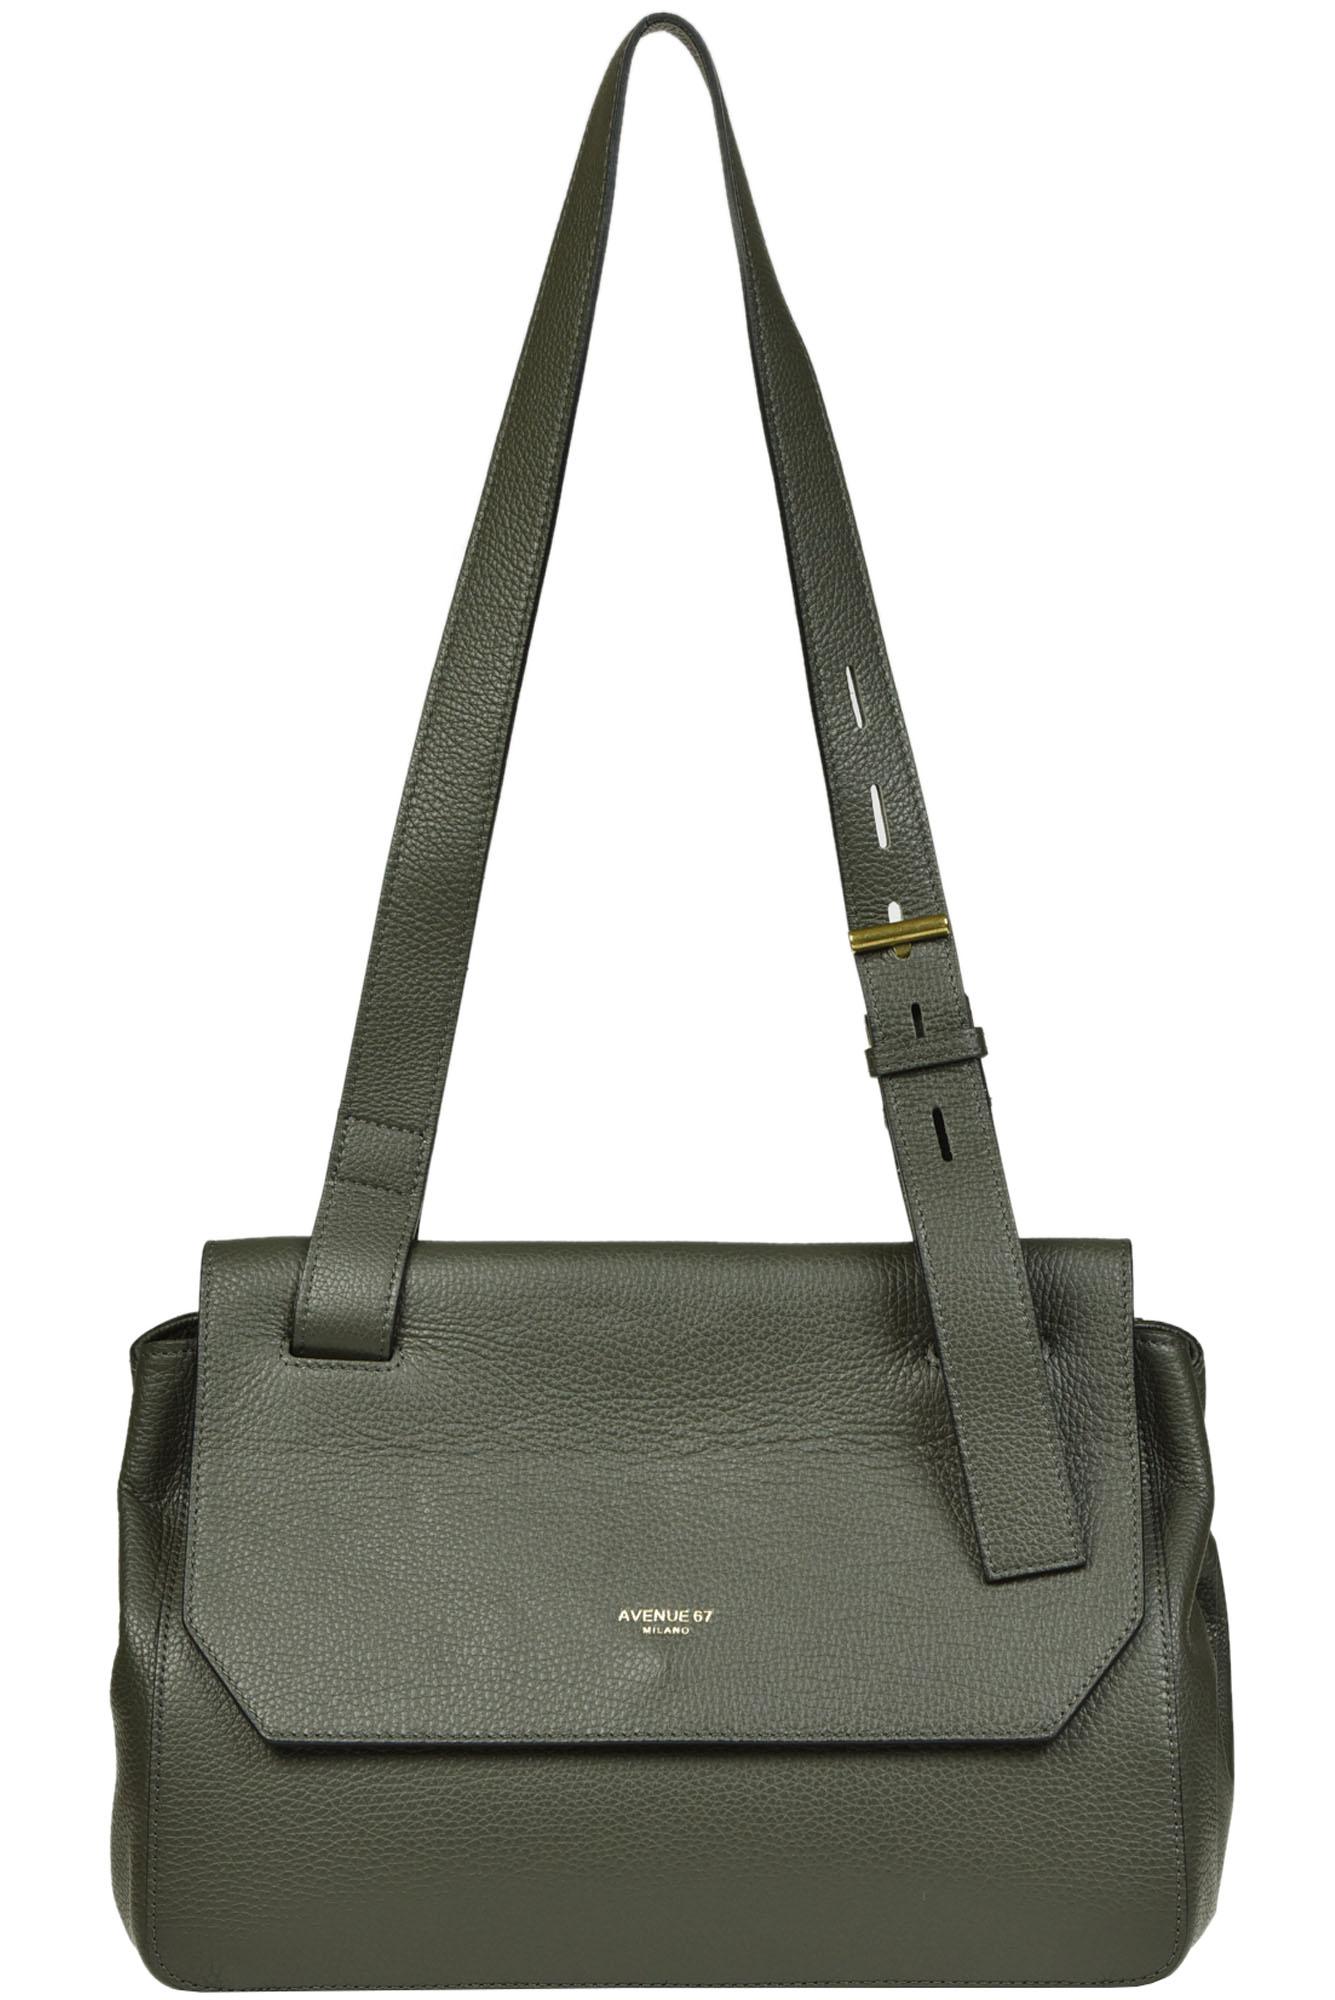 Avenue 67 Odette Grainy Leather Bag in Green | Lyst